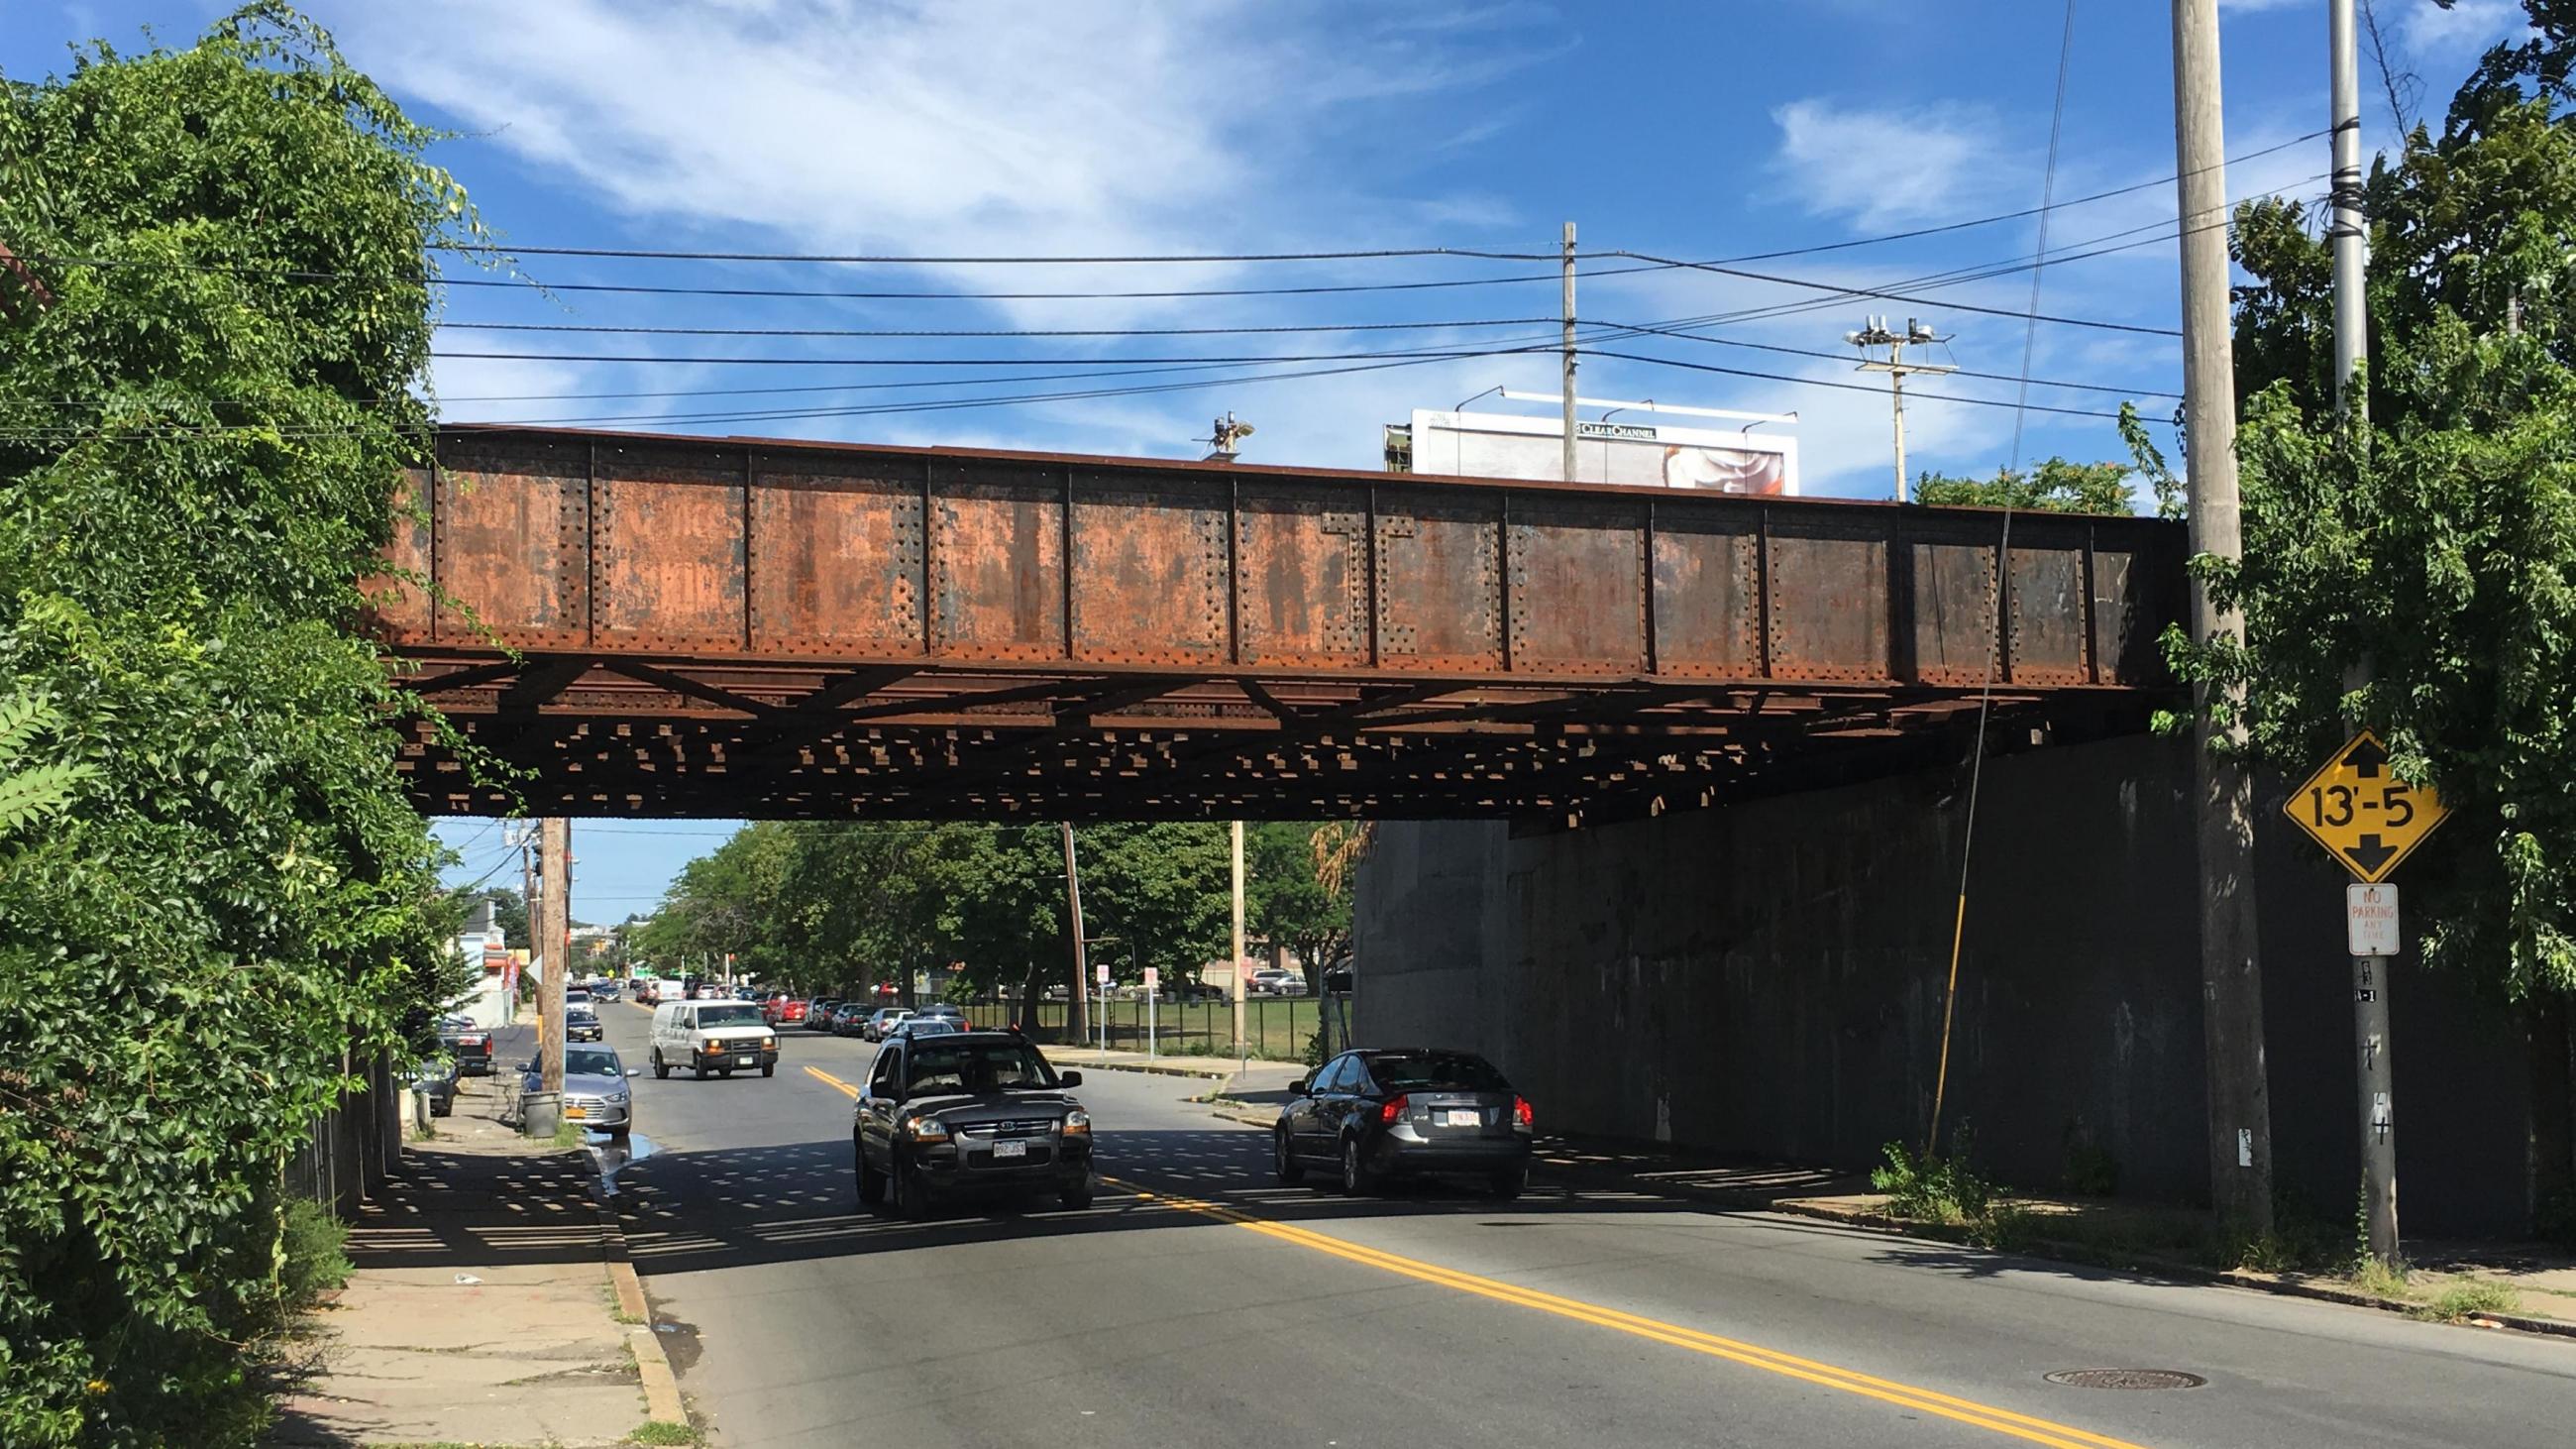 The existing Commercial Street bridge on the Newburyport/Rockport Line of the Commuter Rail